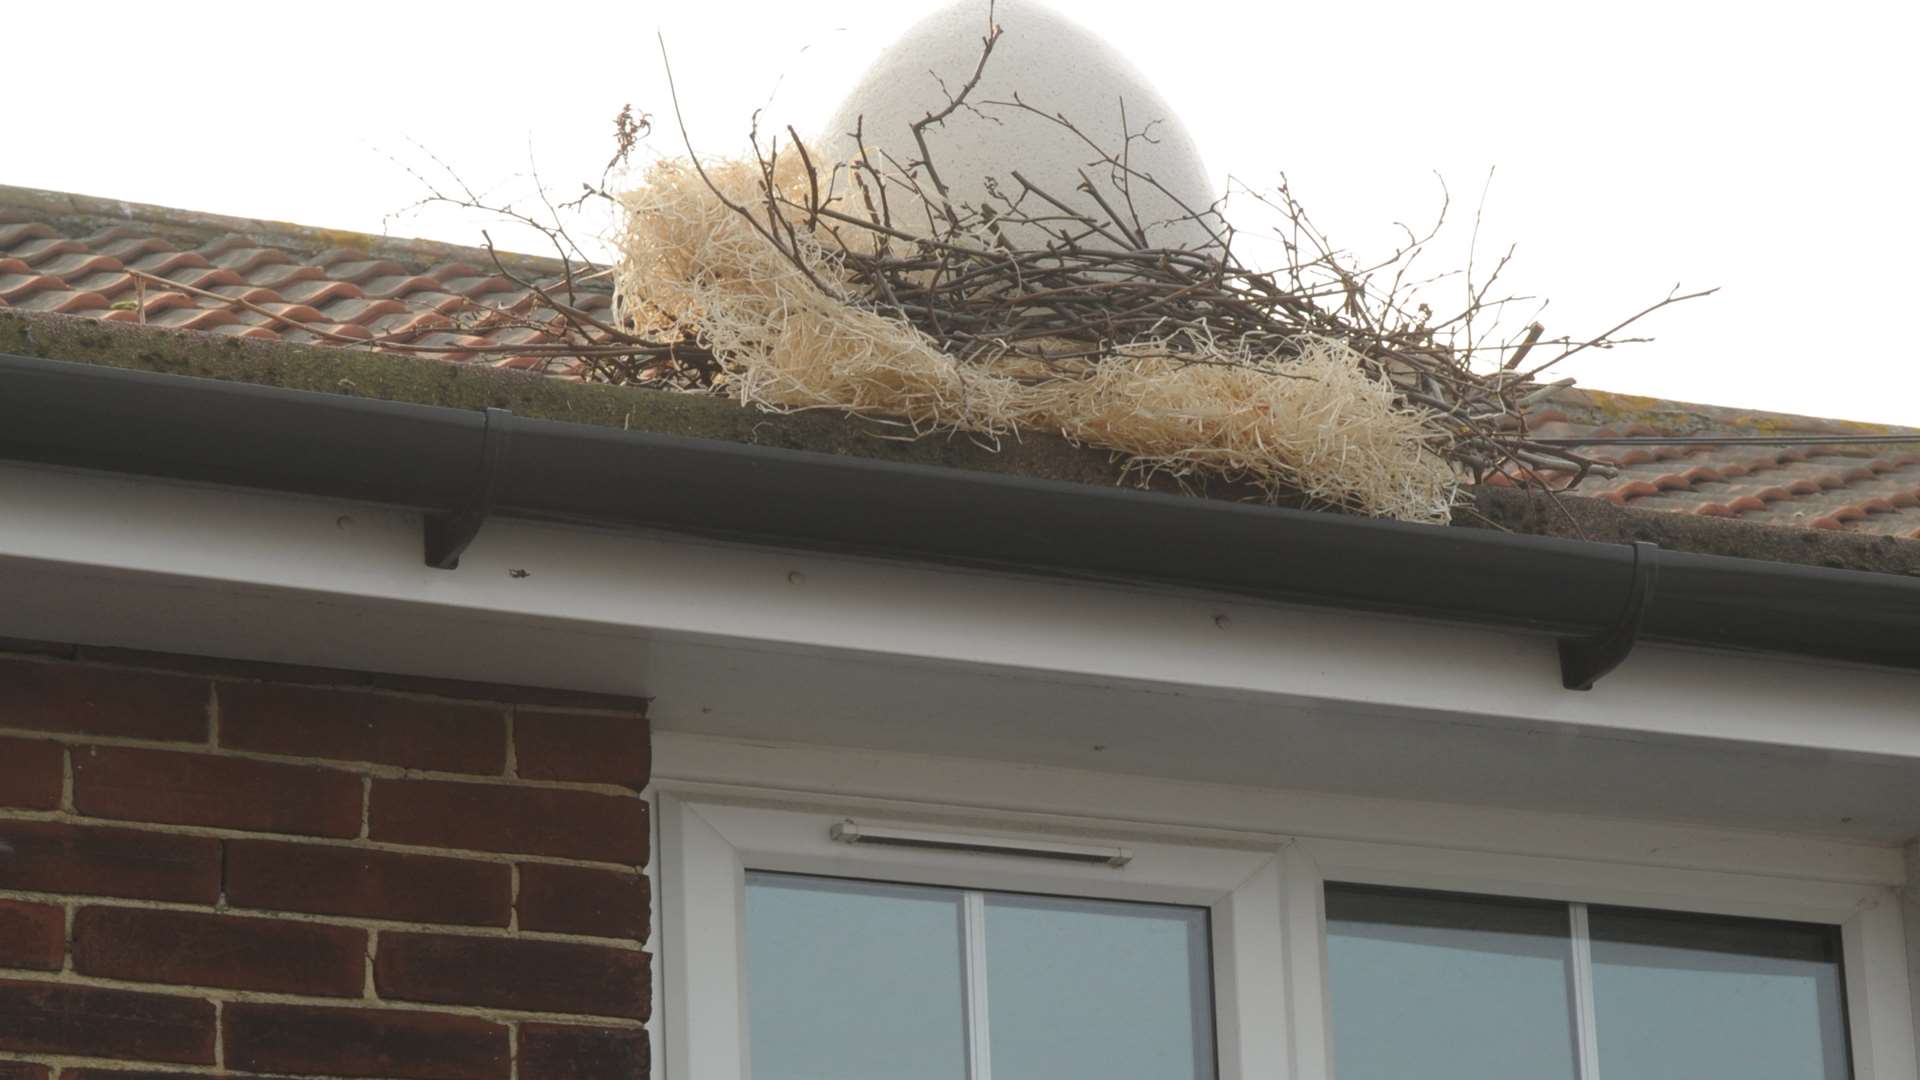 The egg on the roof at Queenborough Primary School